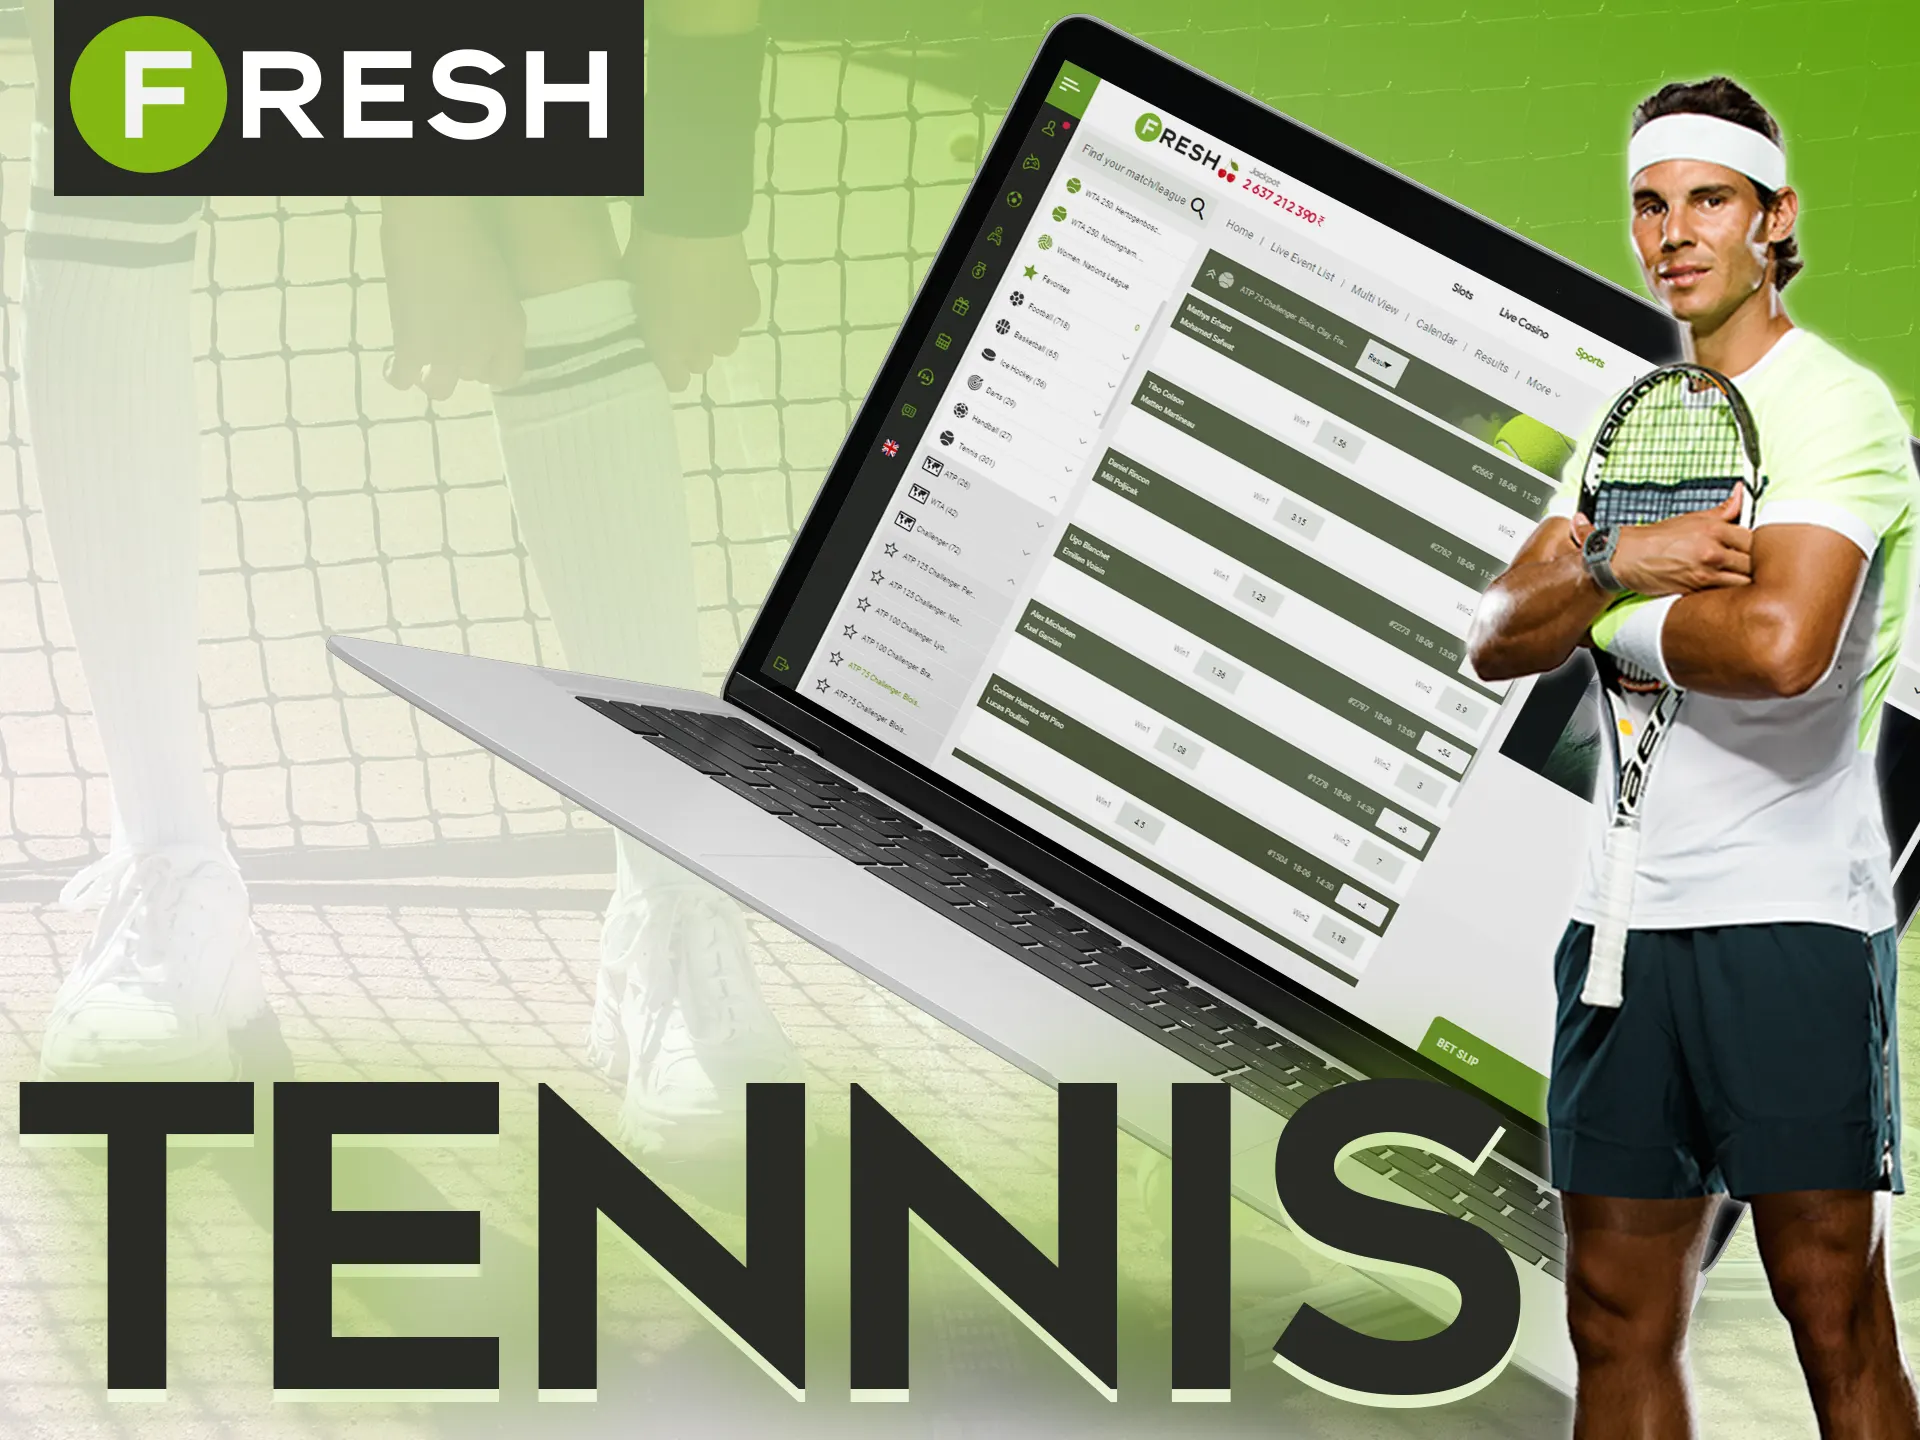 Bet on legendary tennis players at the Fresh Casino.